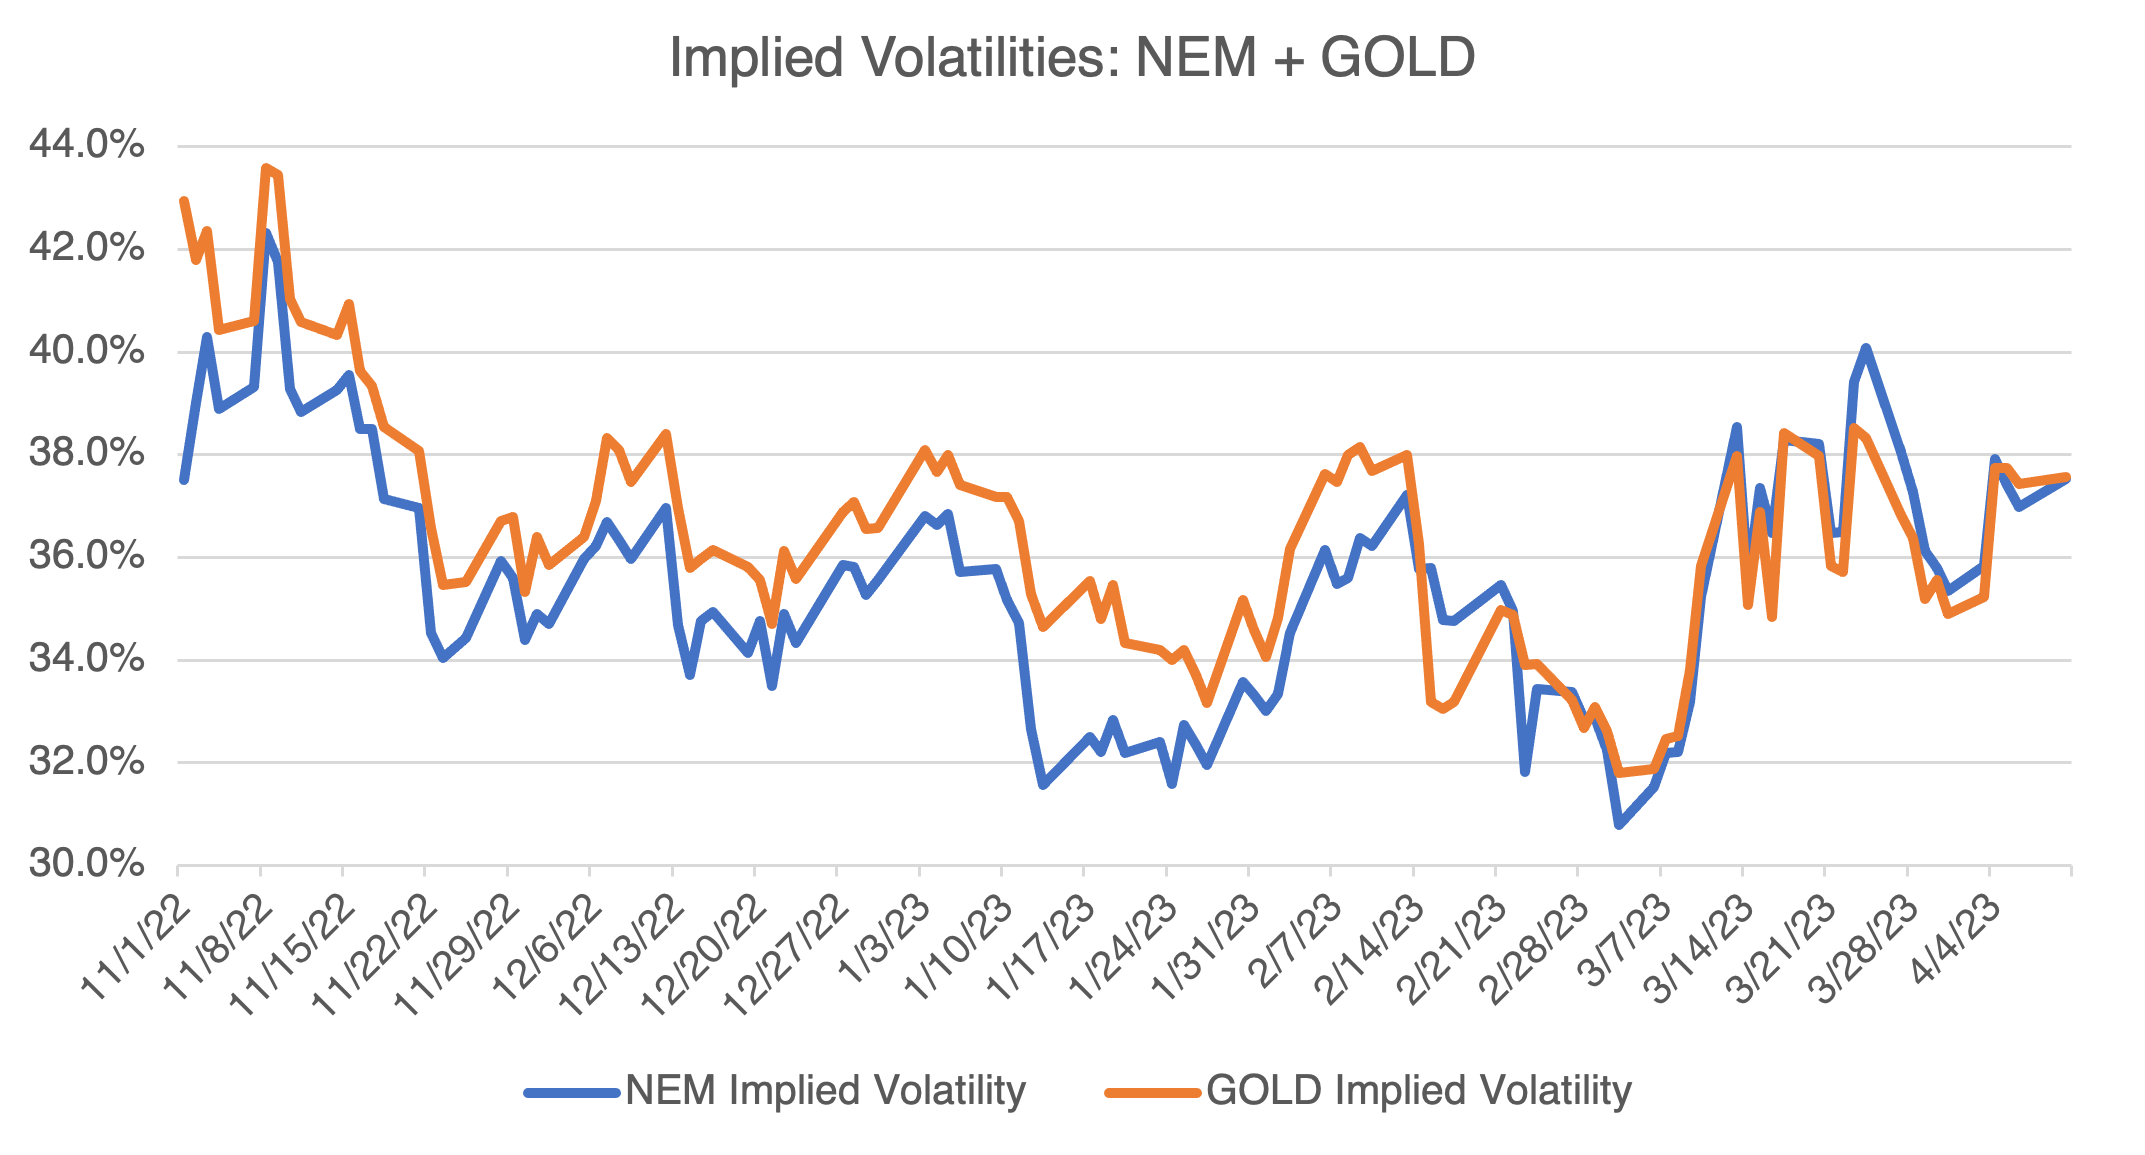 Implied volatilities for NEM and GOLD